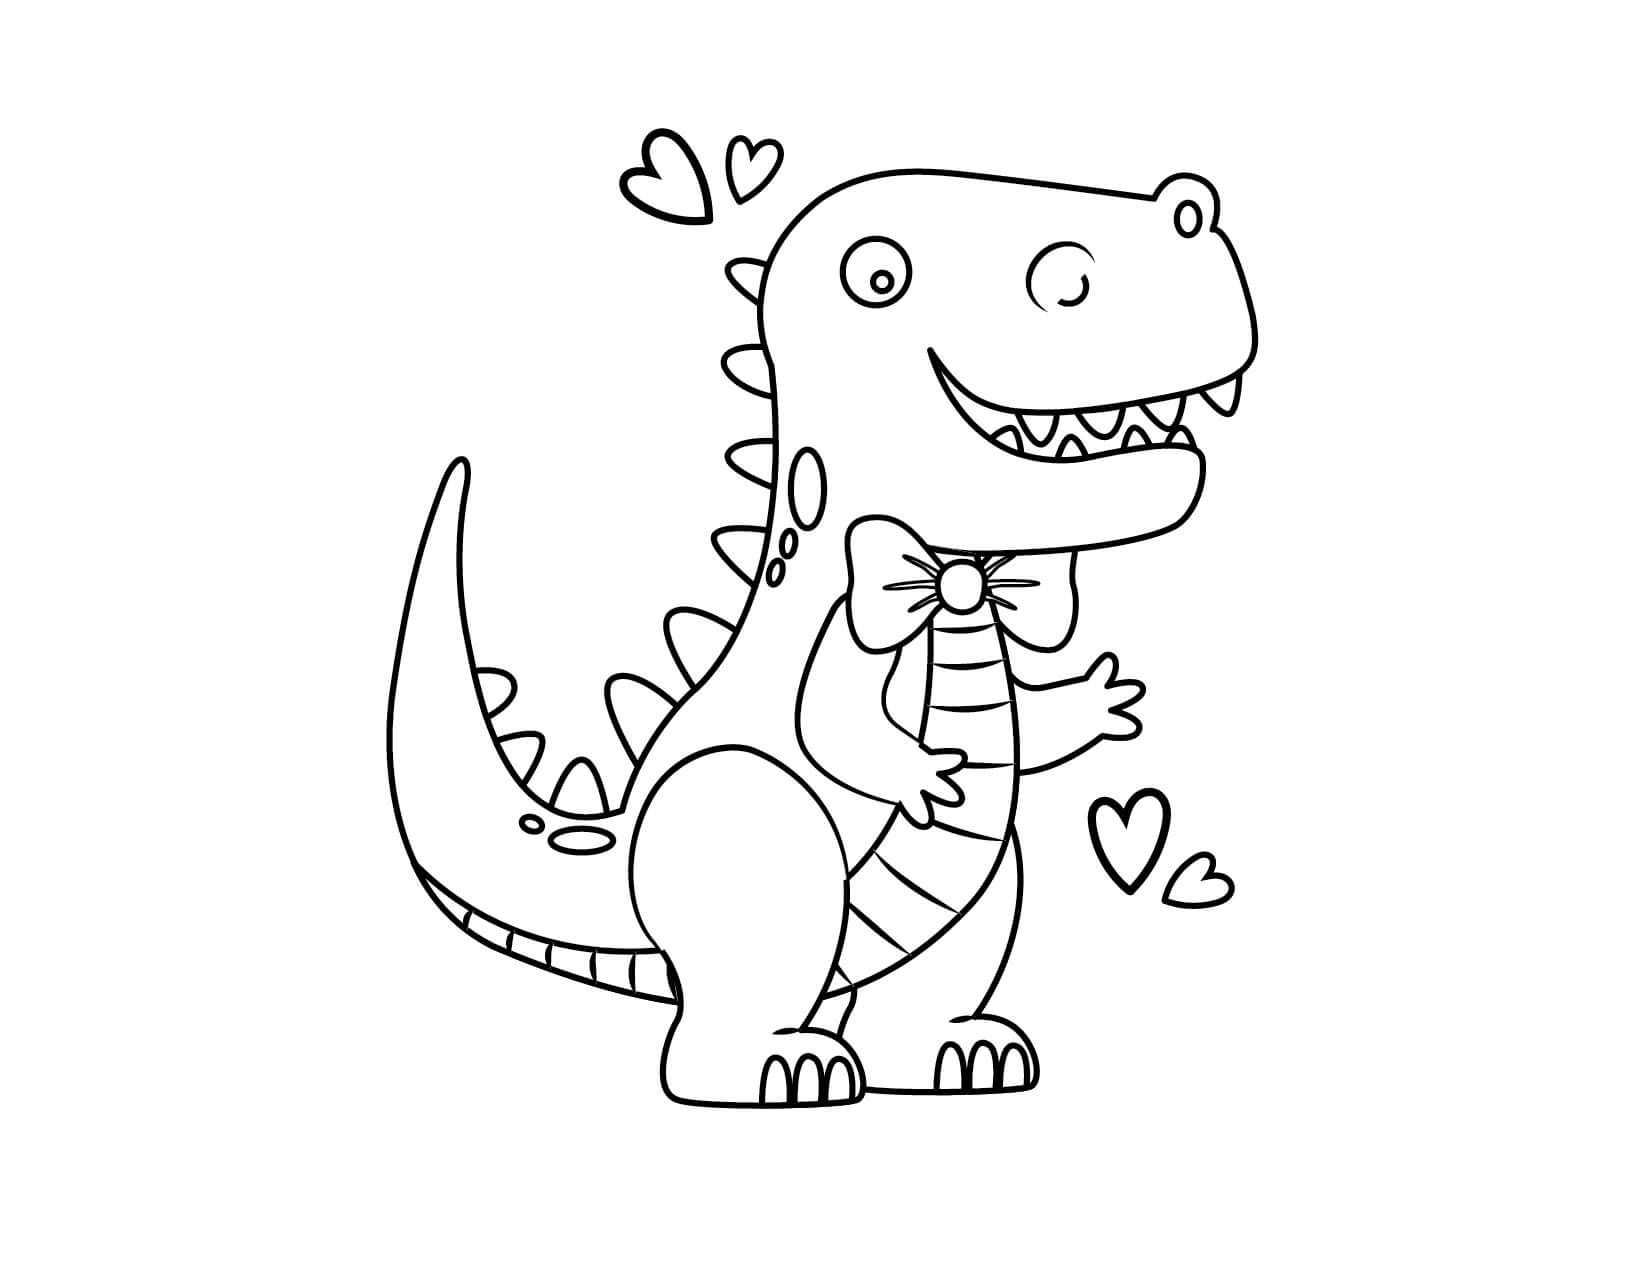 T-Rex in Love coloring page